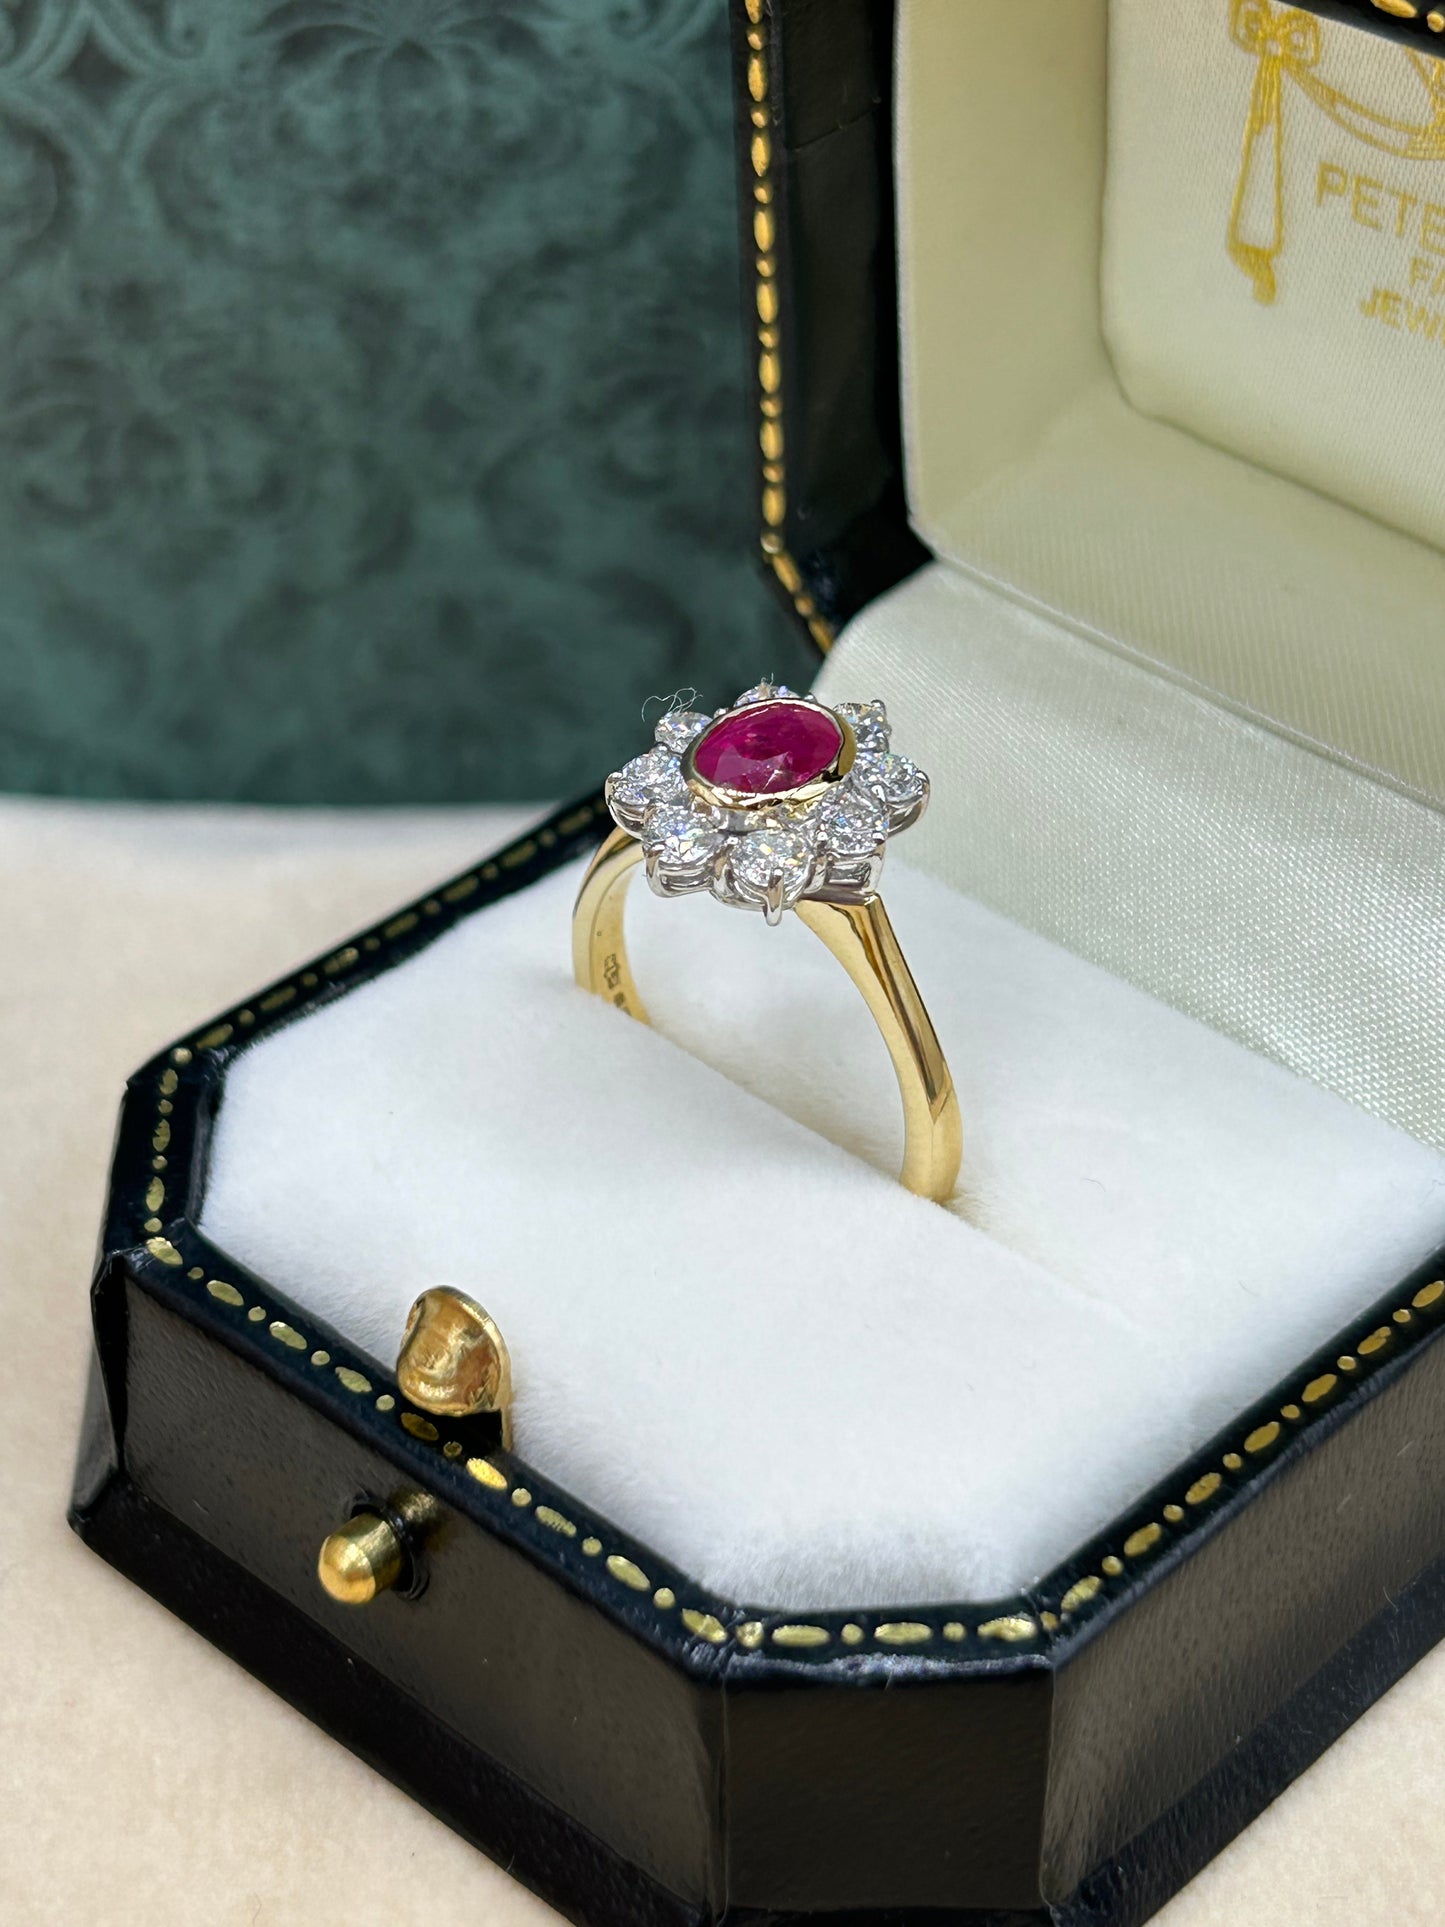 18ct Gold Ruby and Diamond Cluster Ring.